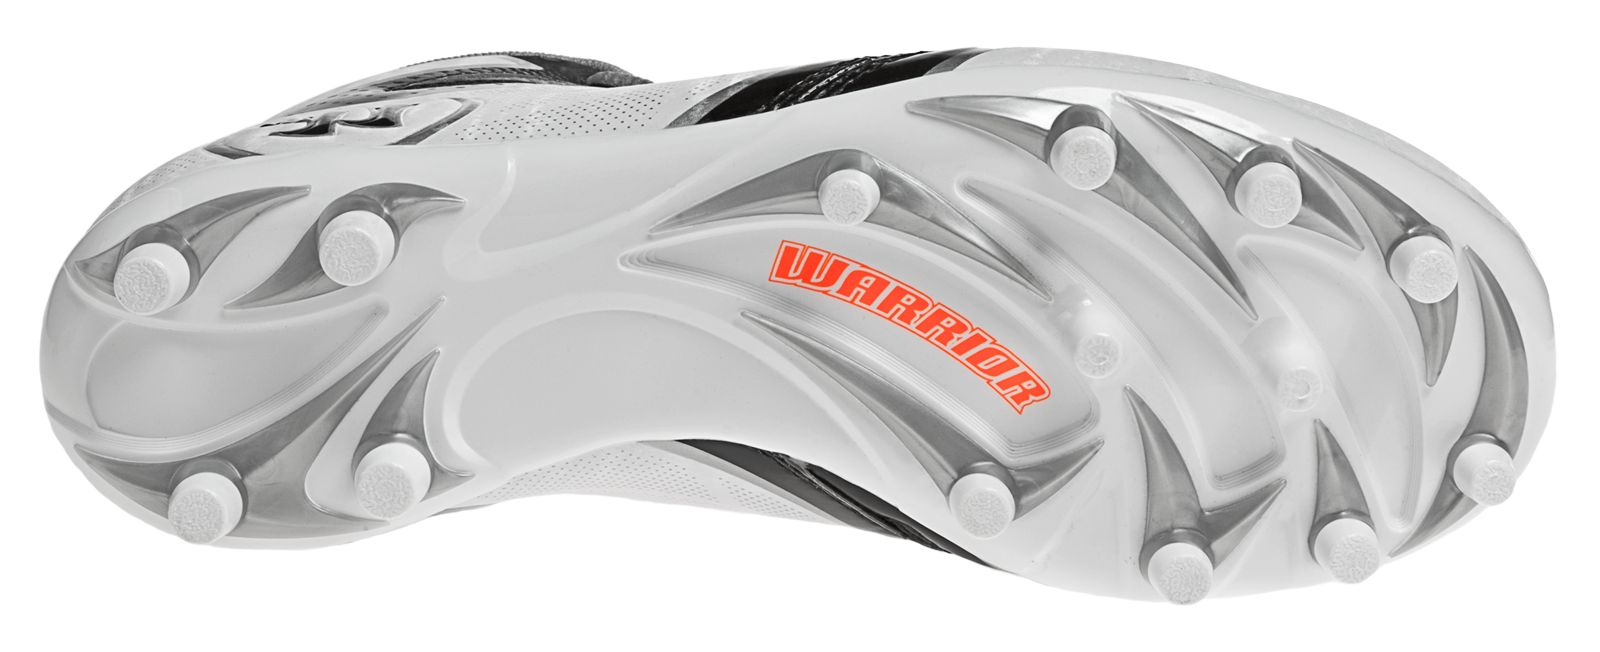 Youth Burn Speed 6.0 Jr. Cleat, White with Black image number 5